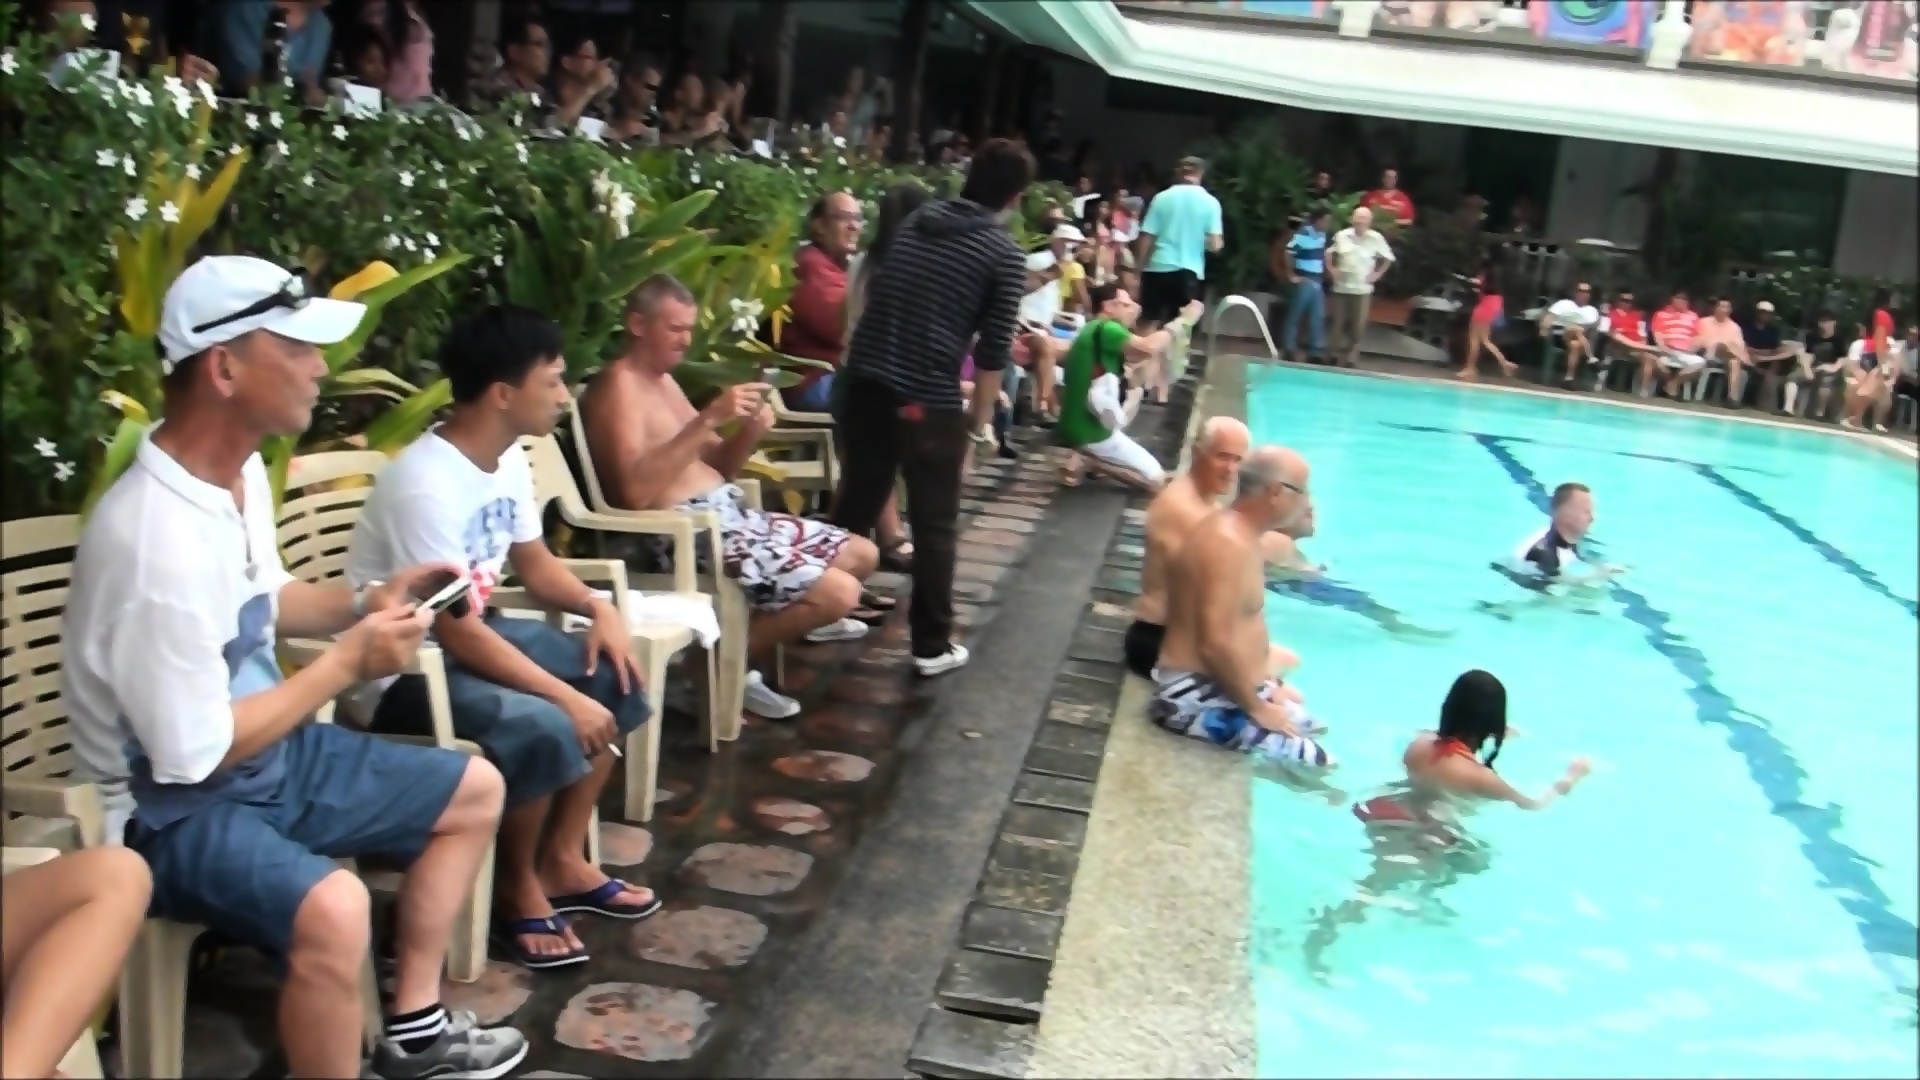 Orchids Hotel Pool Party Angeles City Philippines - EPORNER